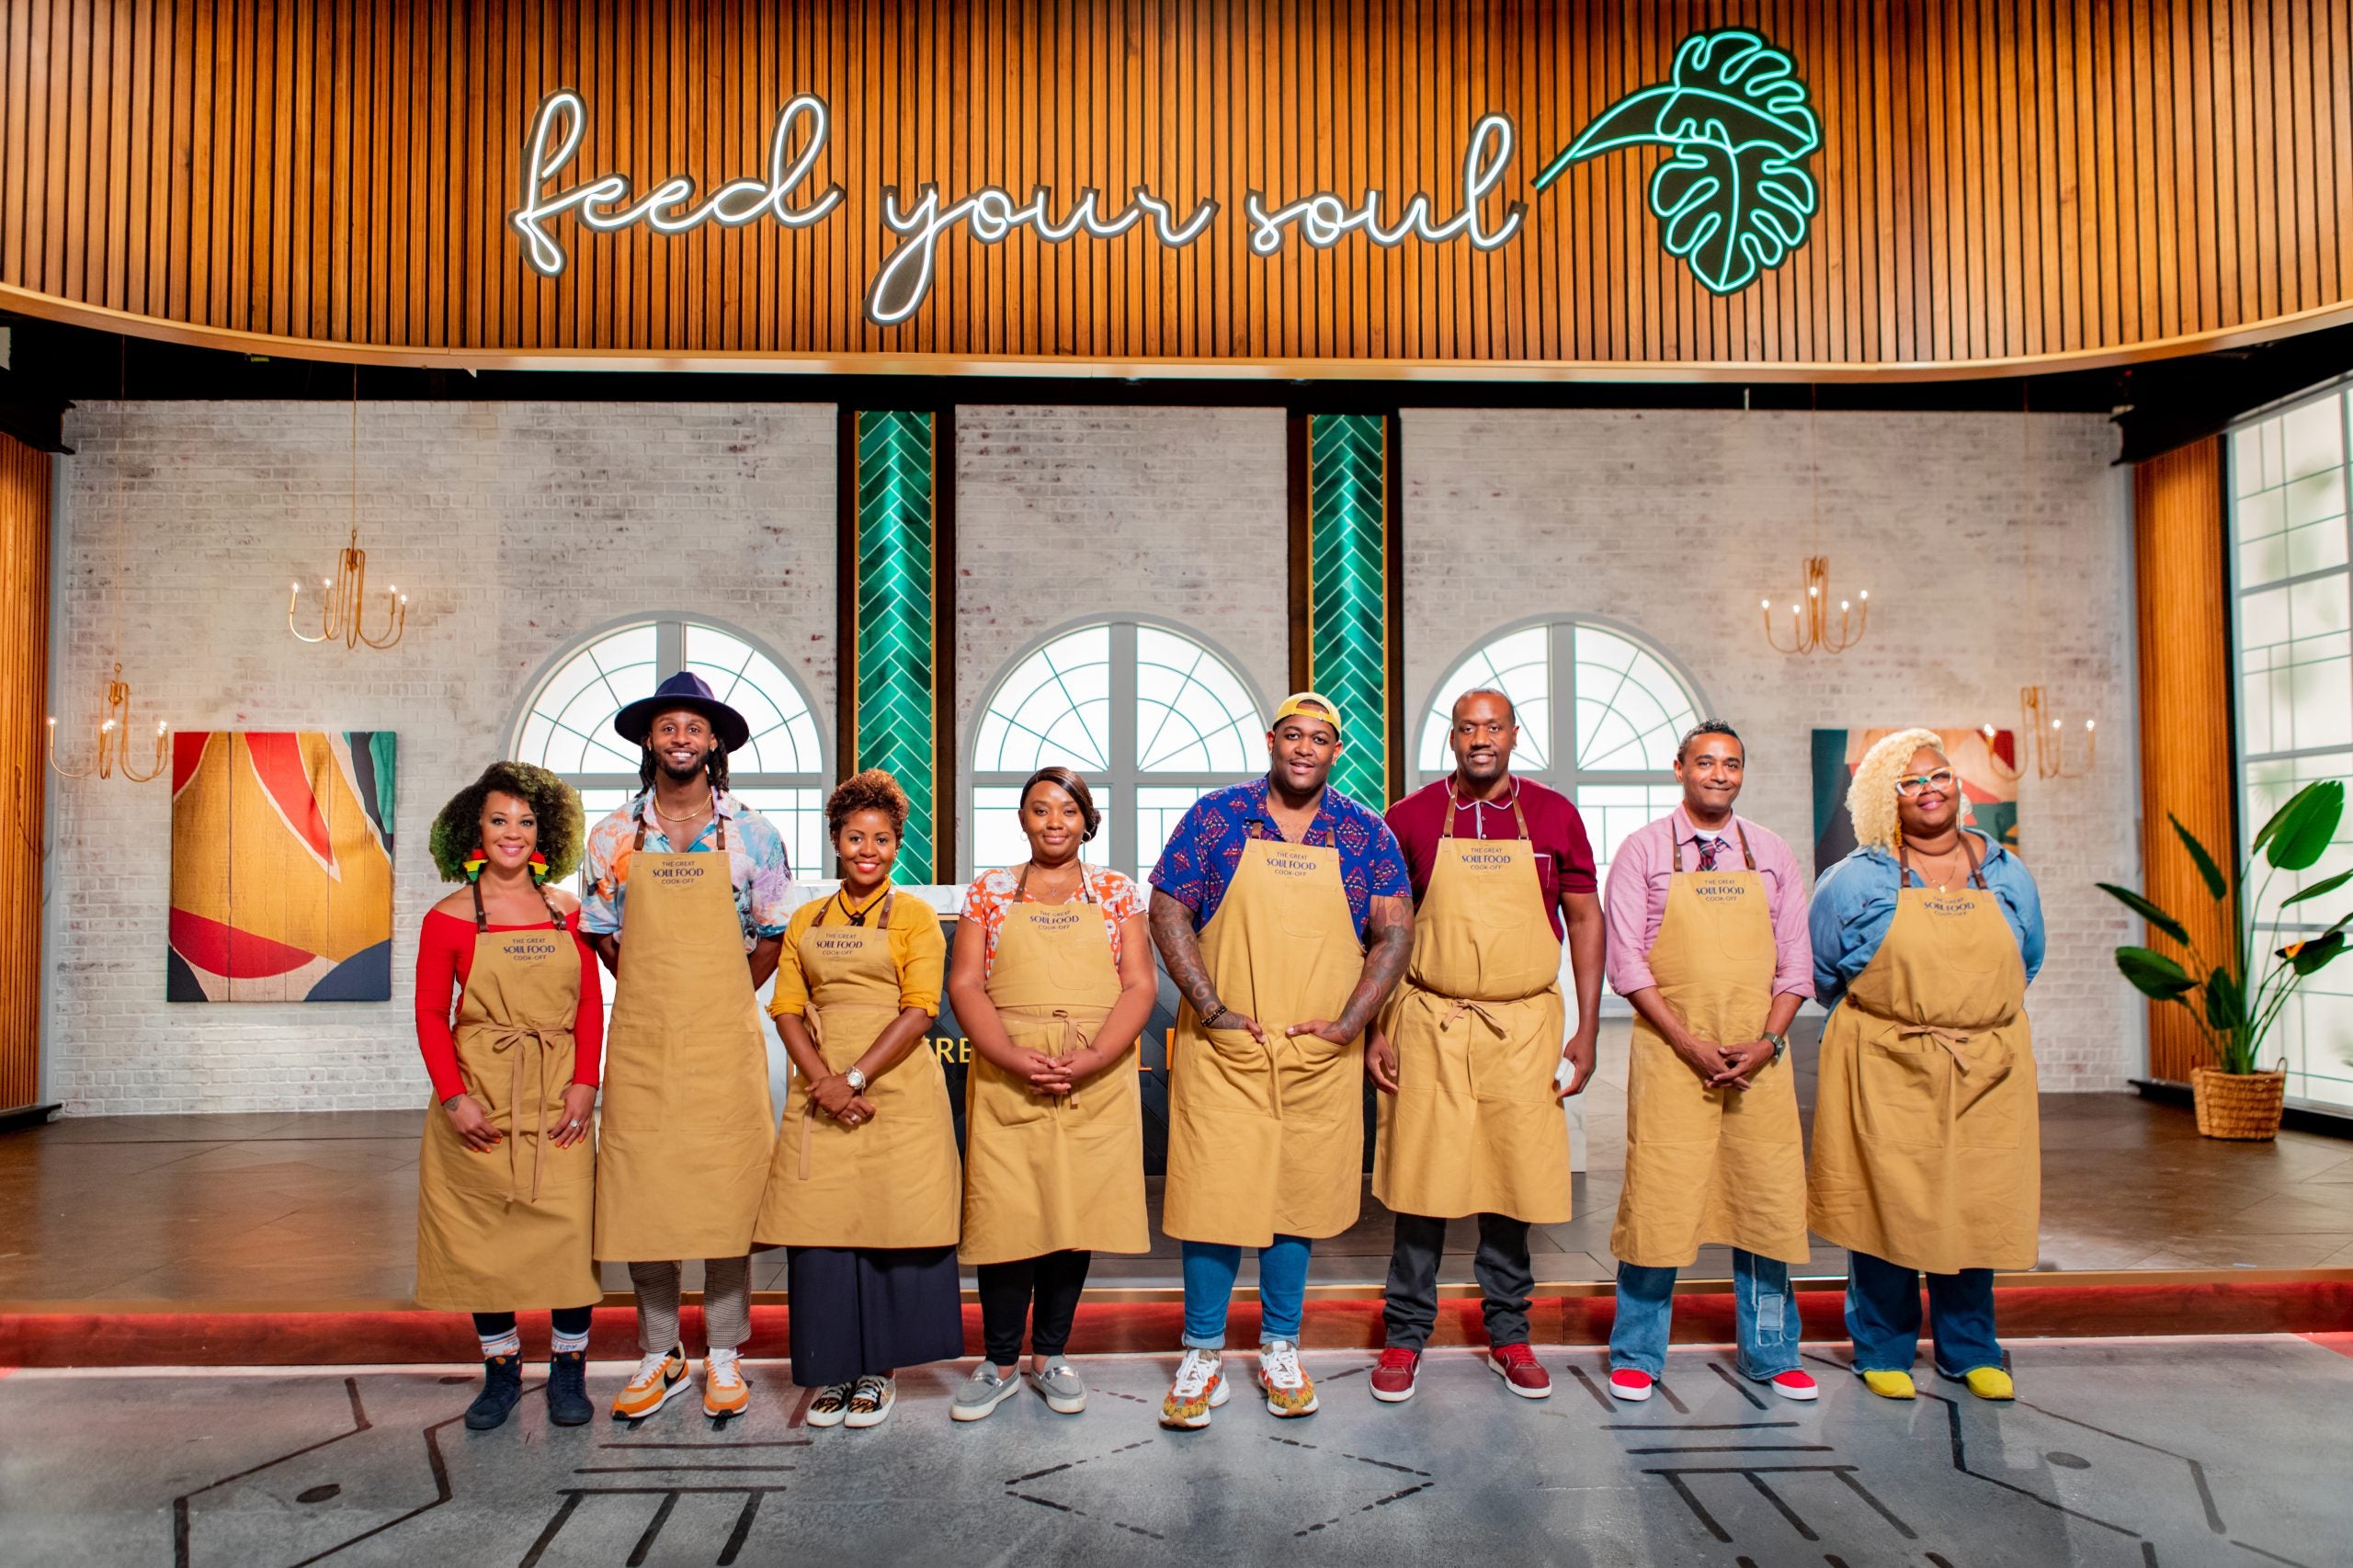 The First TV Cooking Competition Show Devoted to Soul Food Has Arrived!